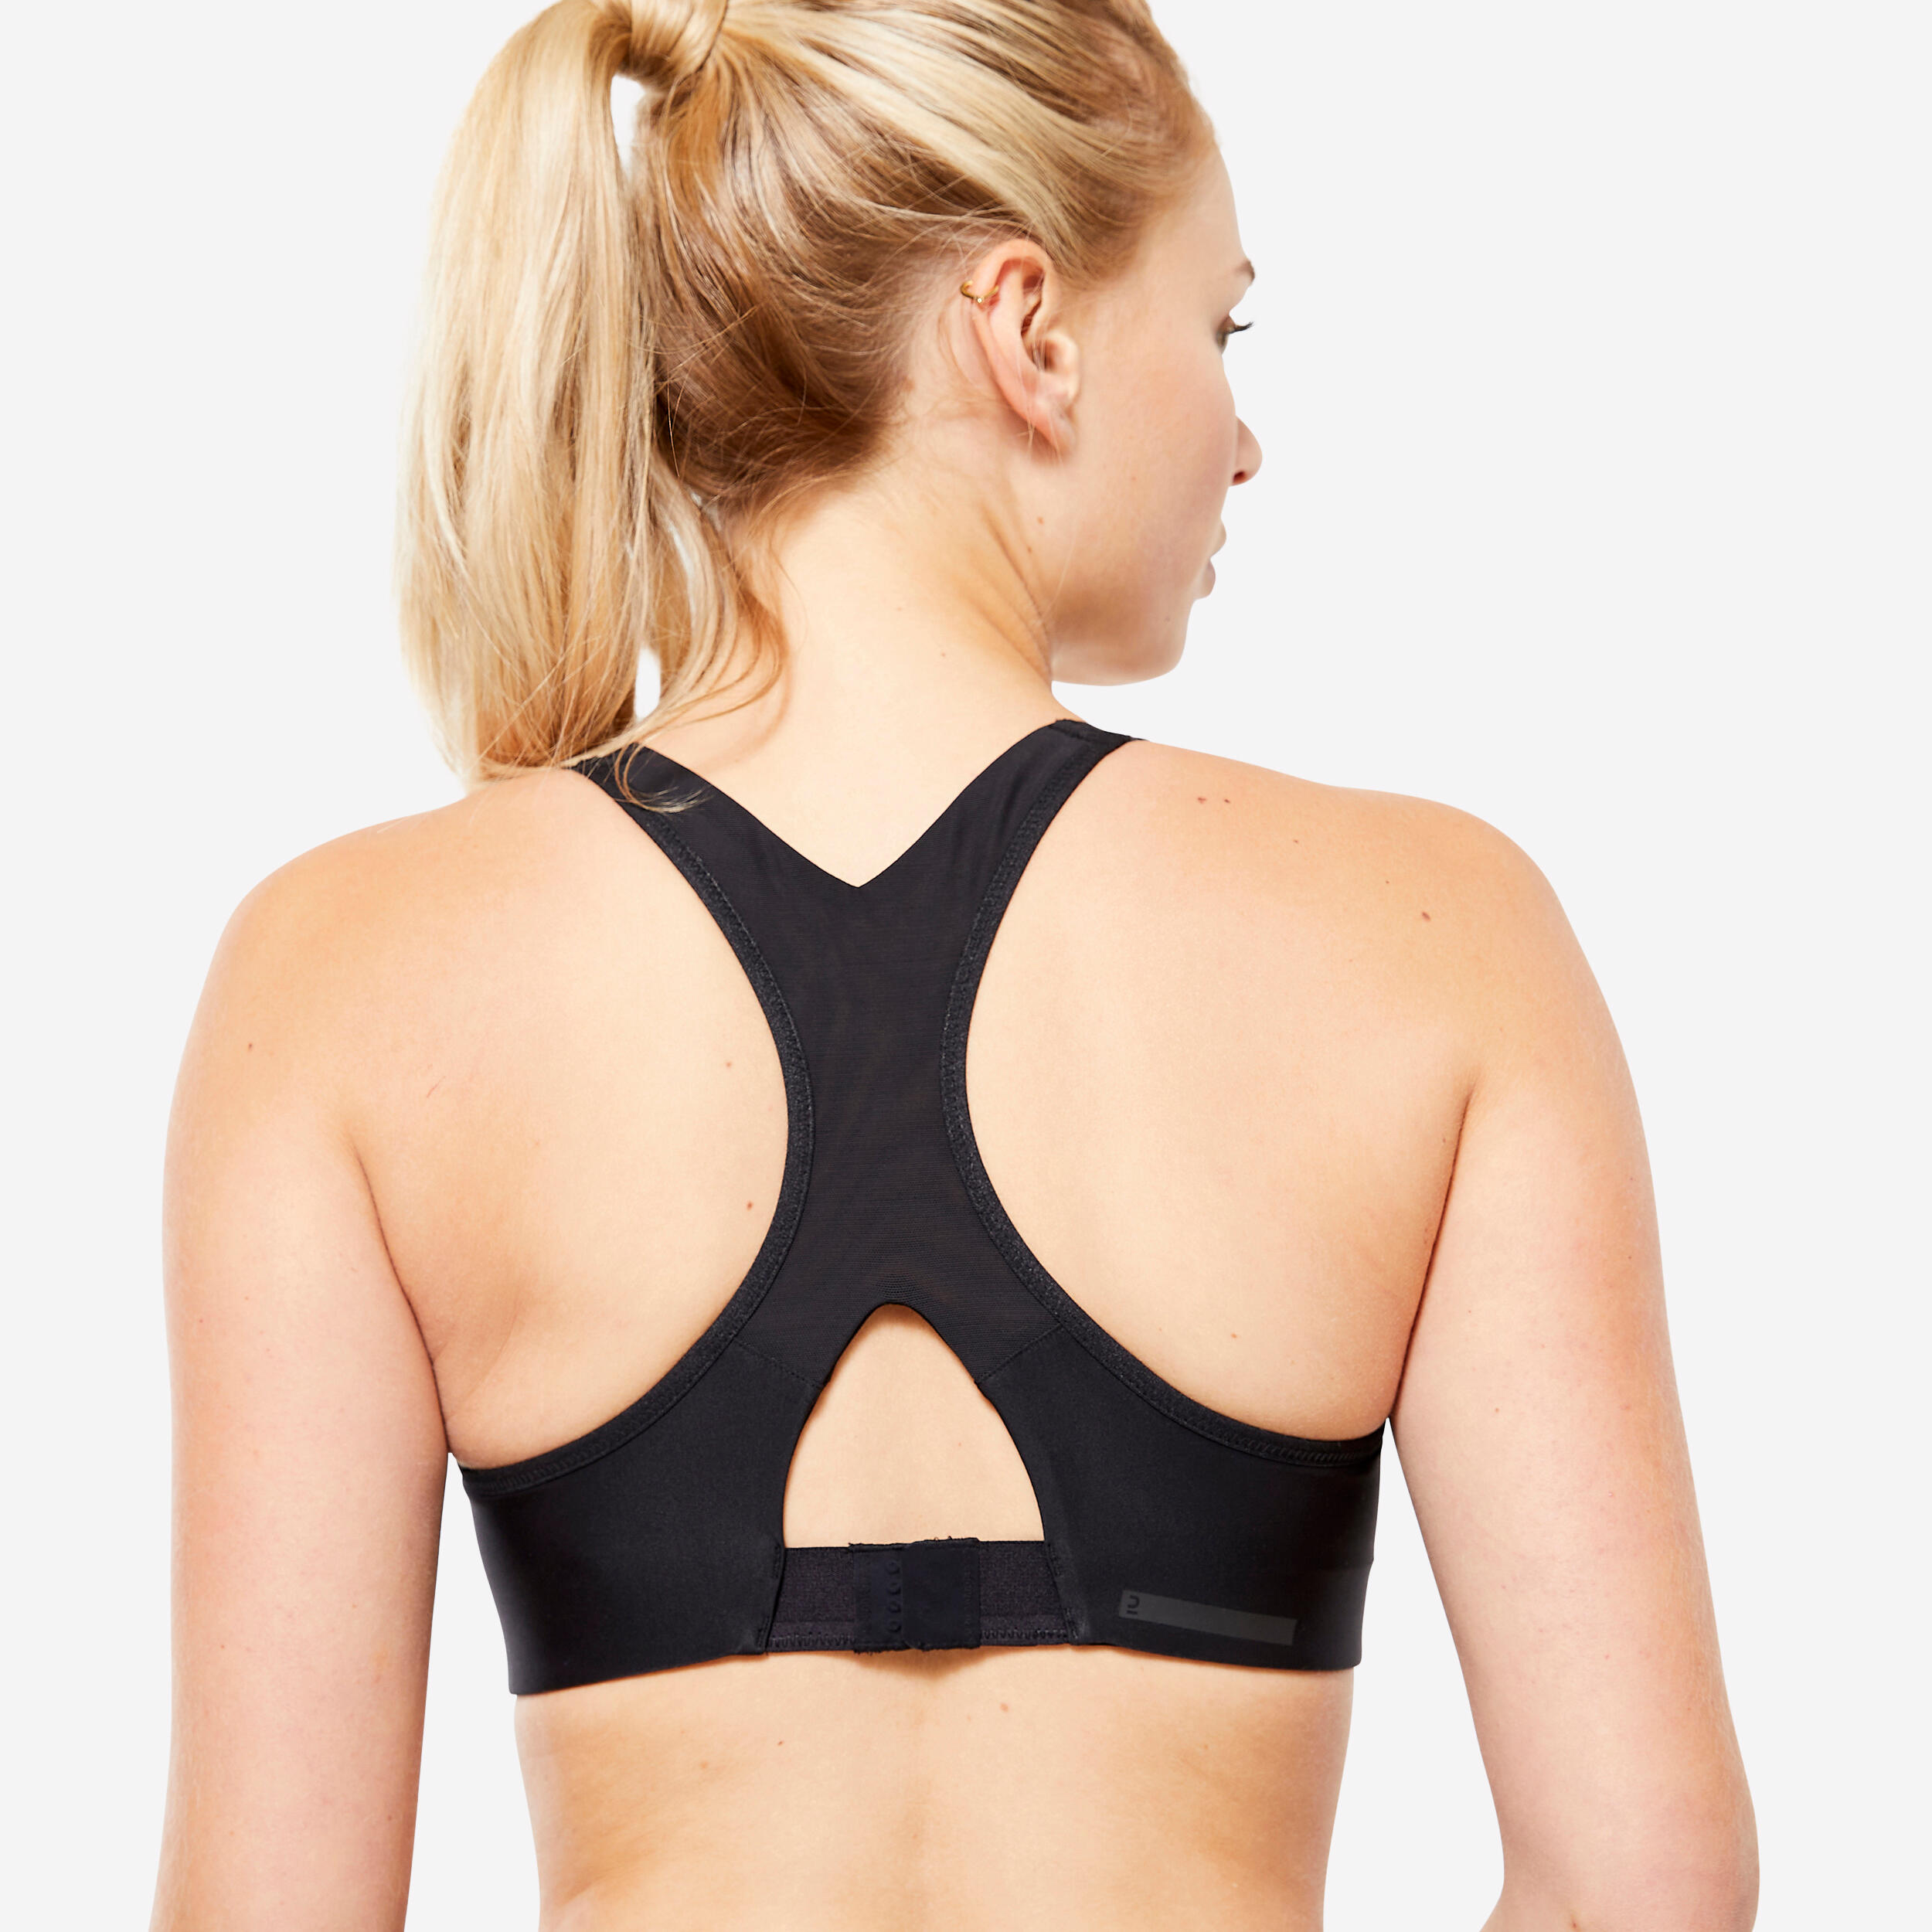 Women's invisible sports bra with high-support cups - Black 5/5